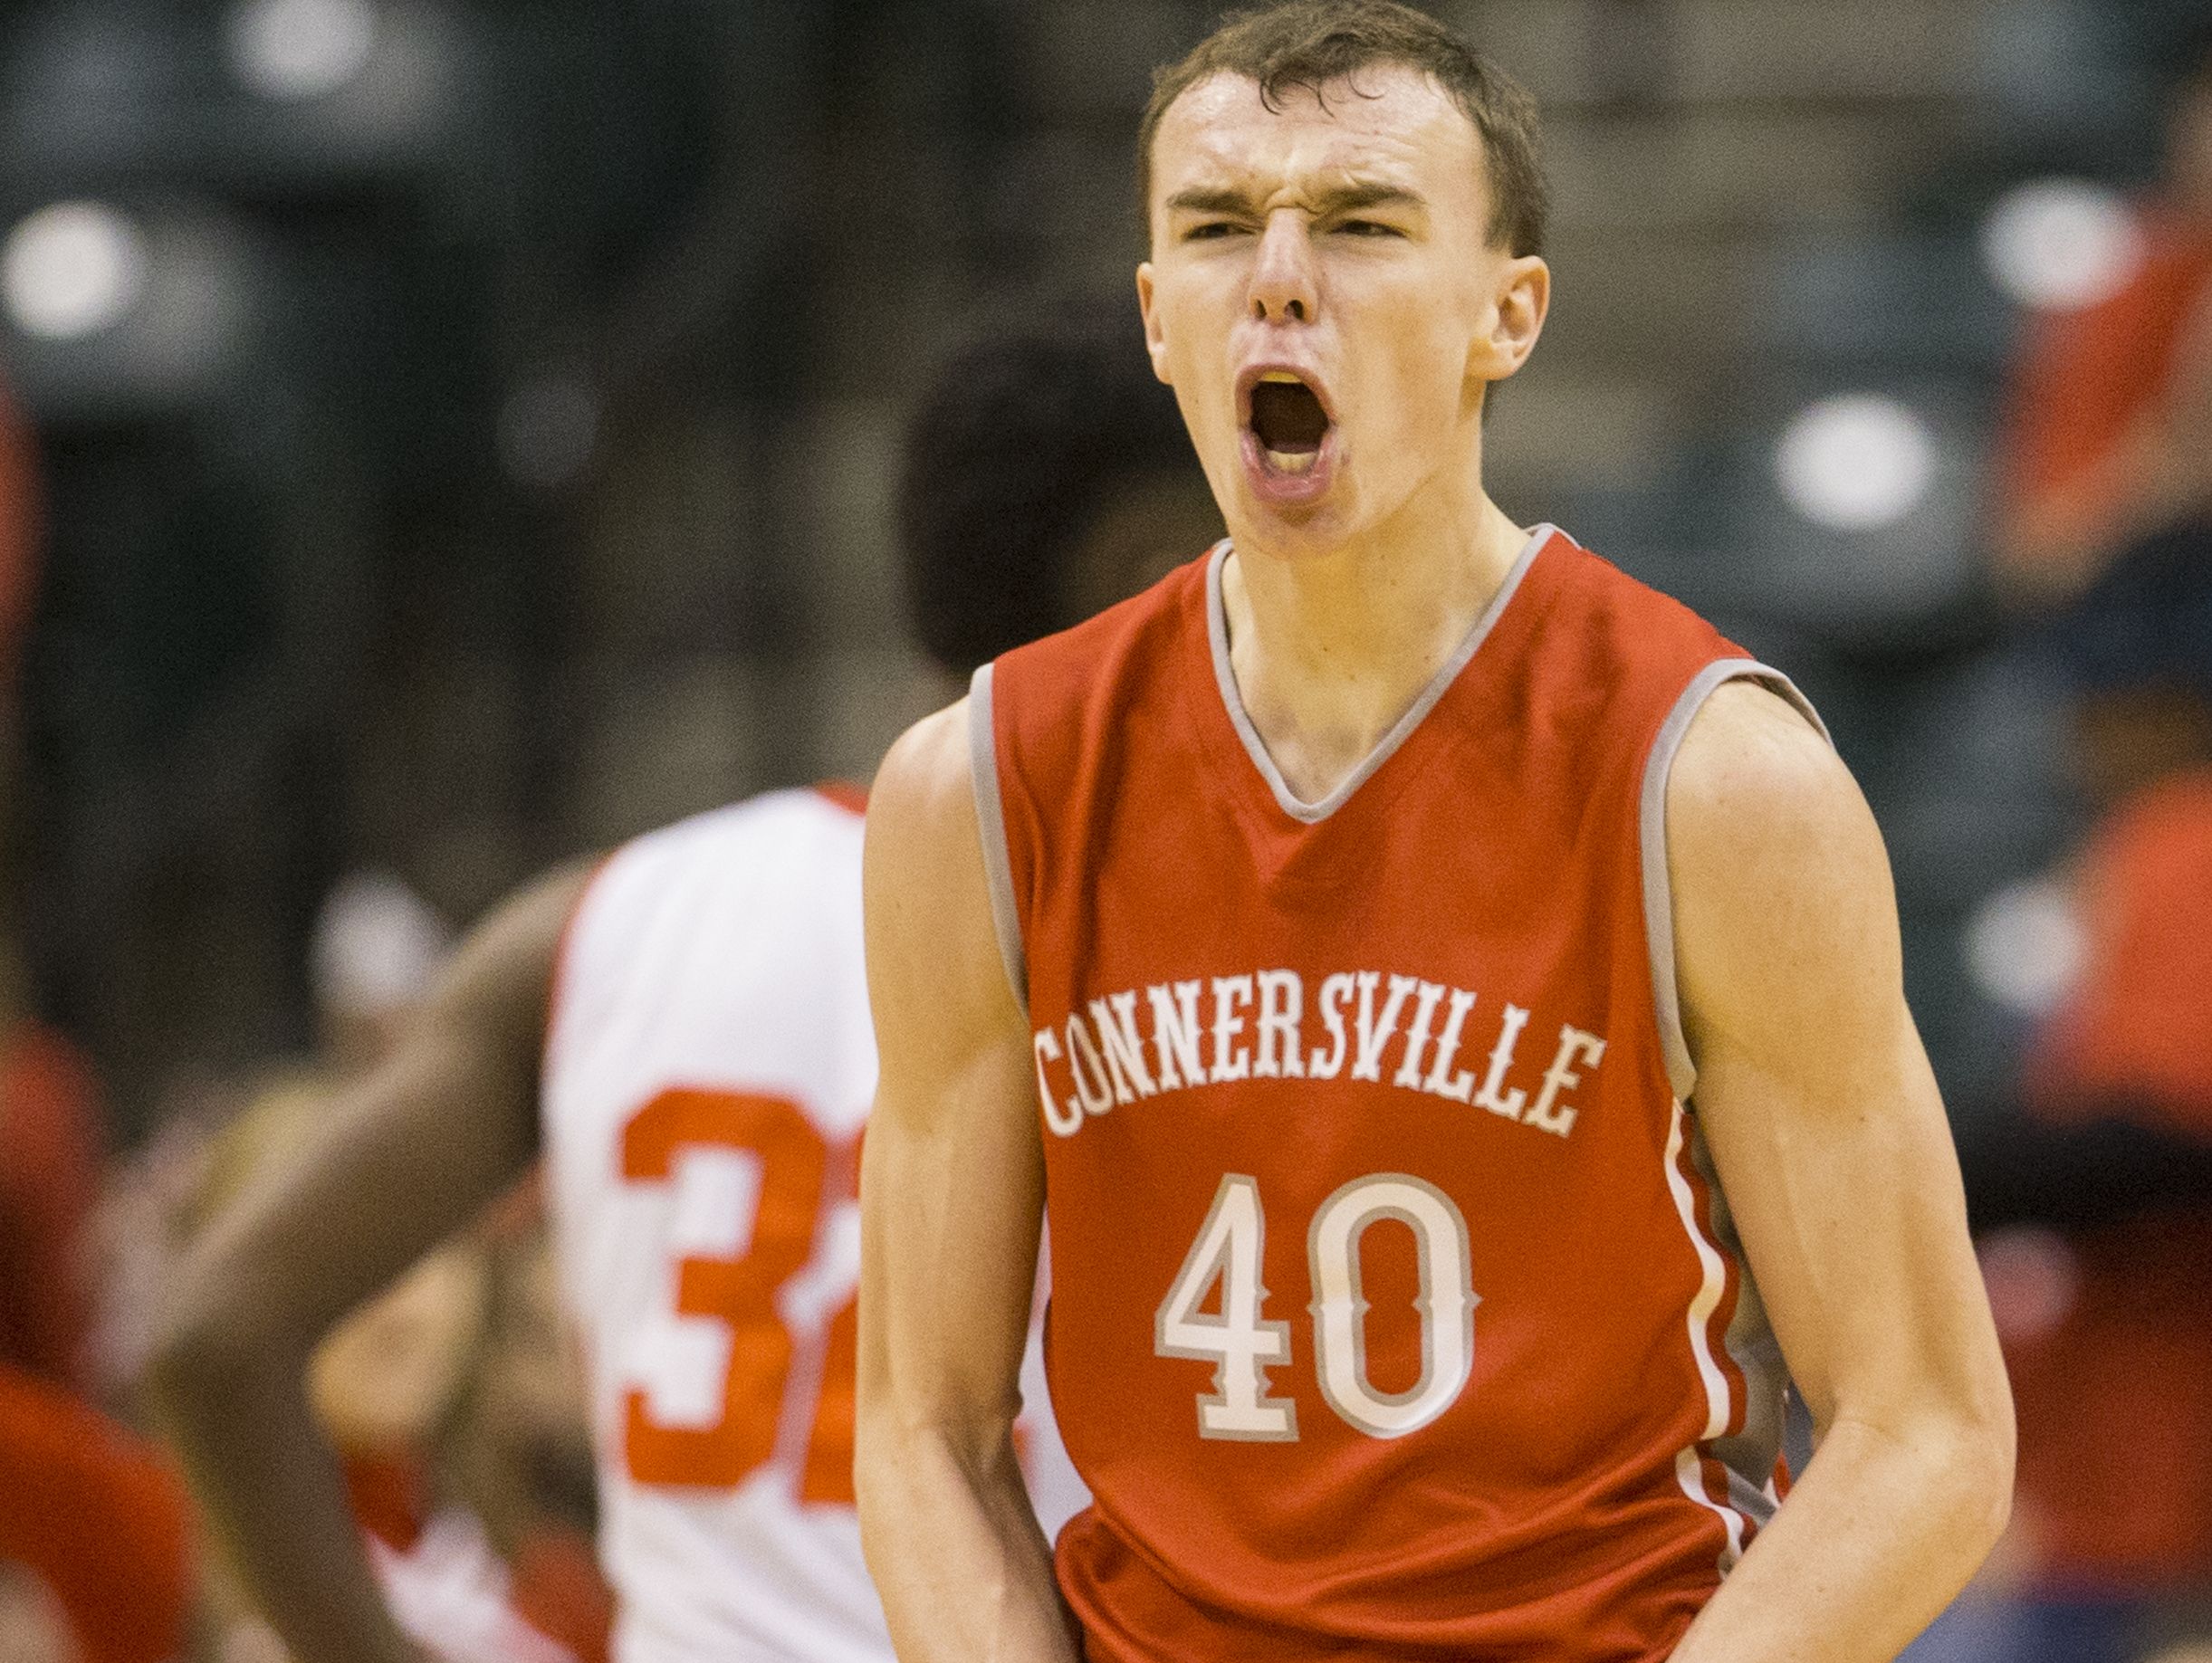 HS basketball notebook: On Connersville, Albers and more | USA TODAY